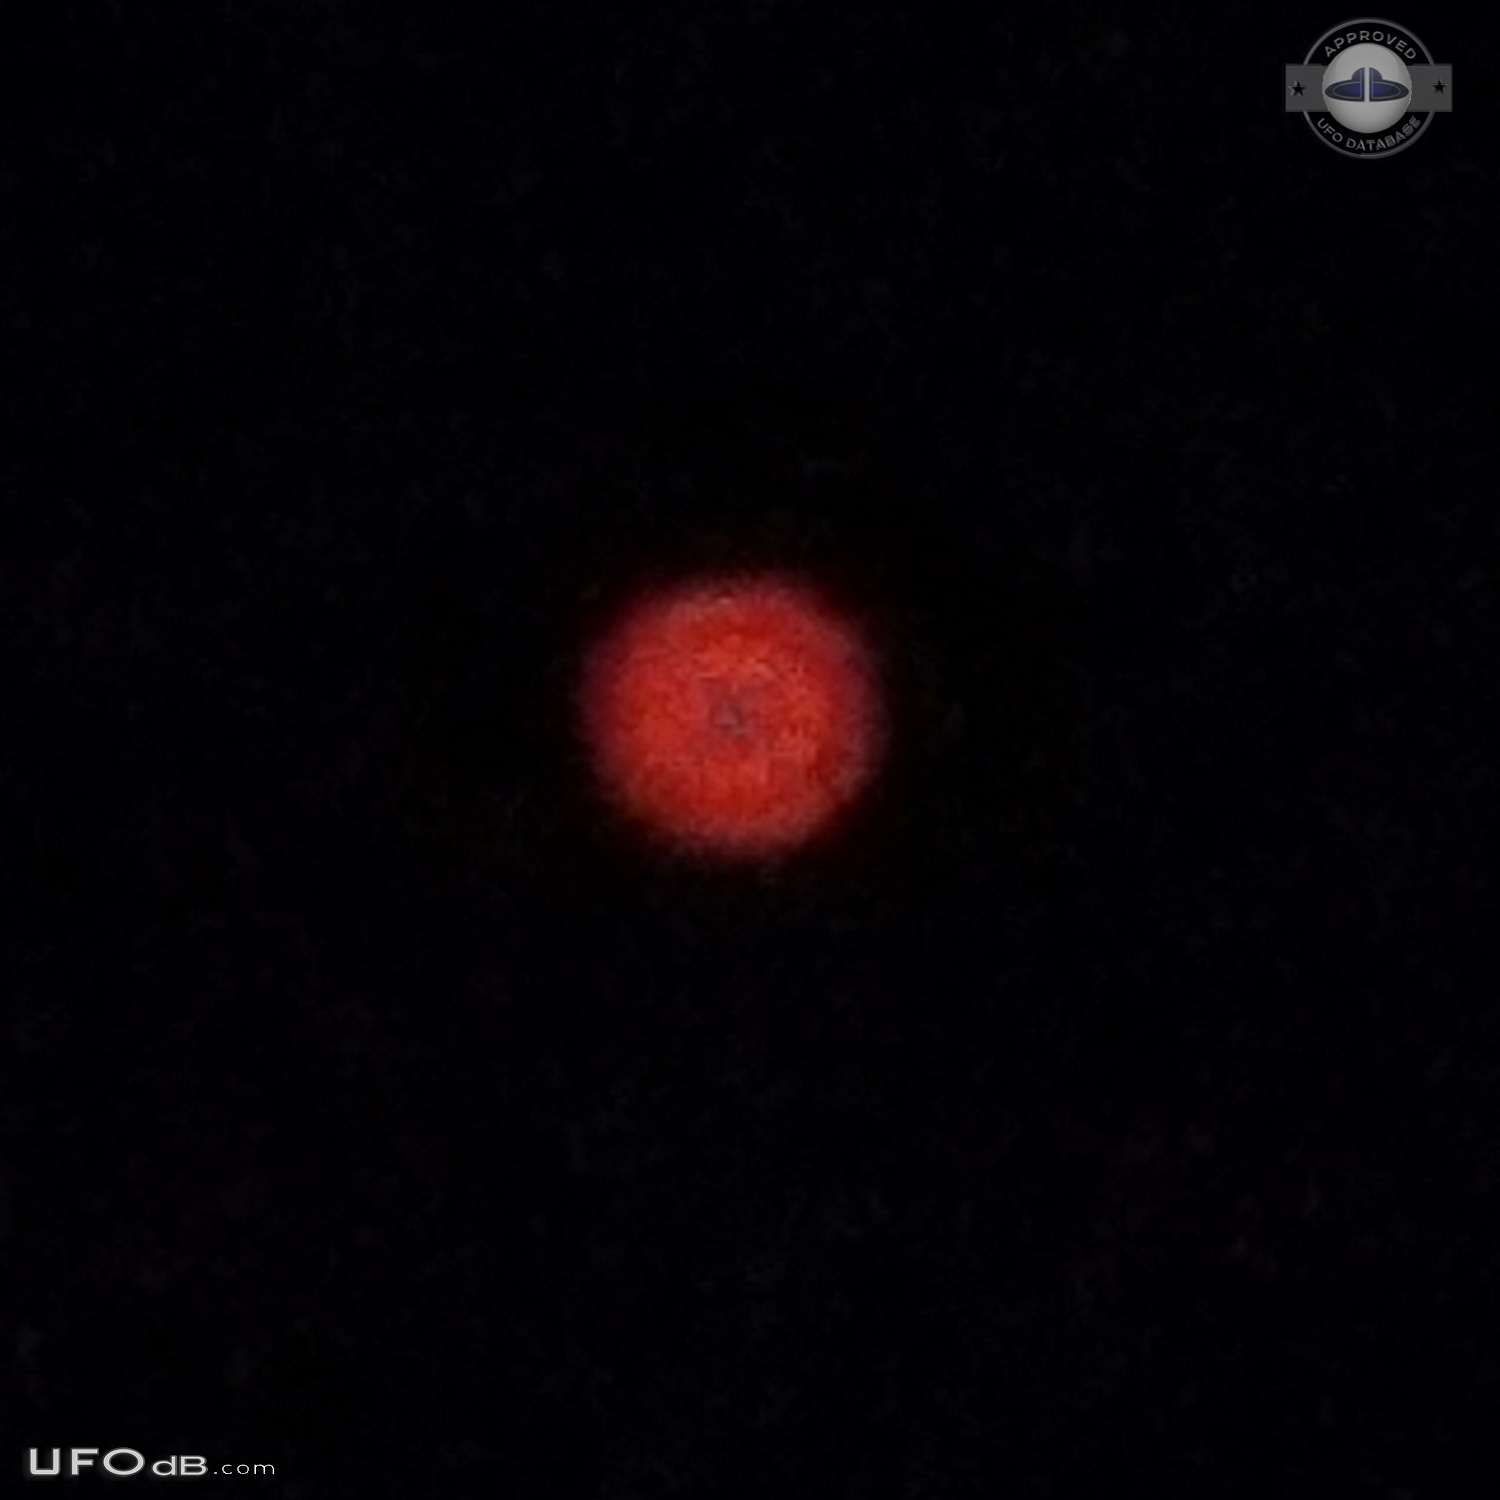 Orange silent ball UFO that moved quickly - Oadby, Leicestershire 2014 UFO Picture #666-4